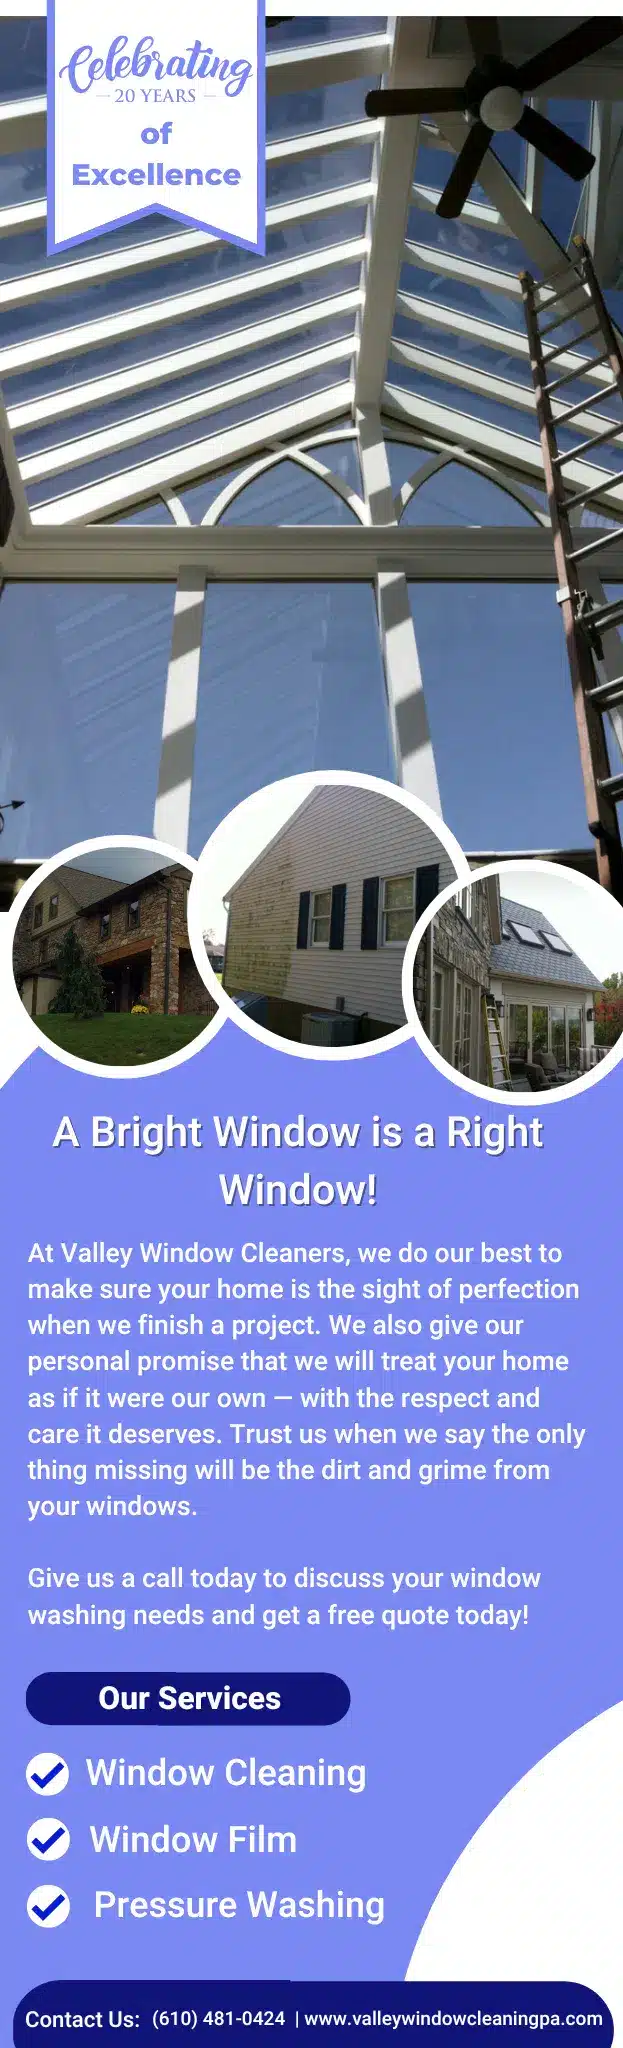 A Bright Window is a Right Window! 3